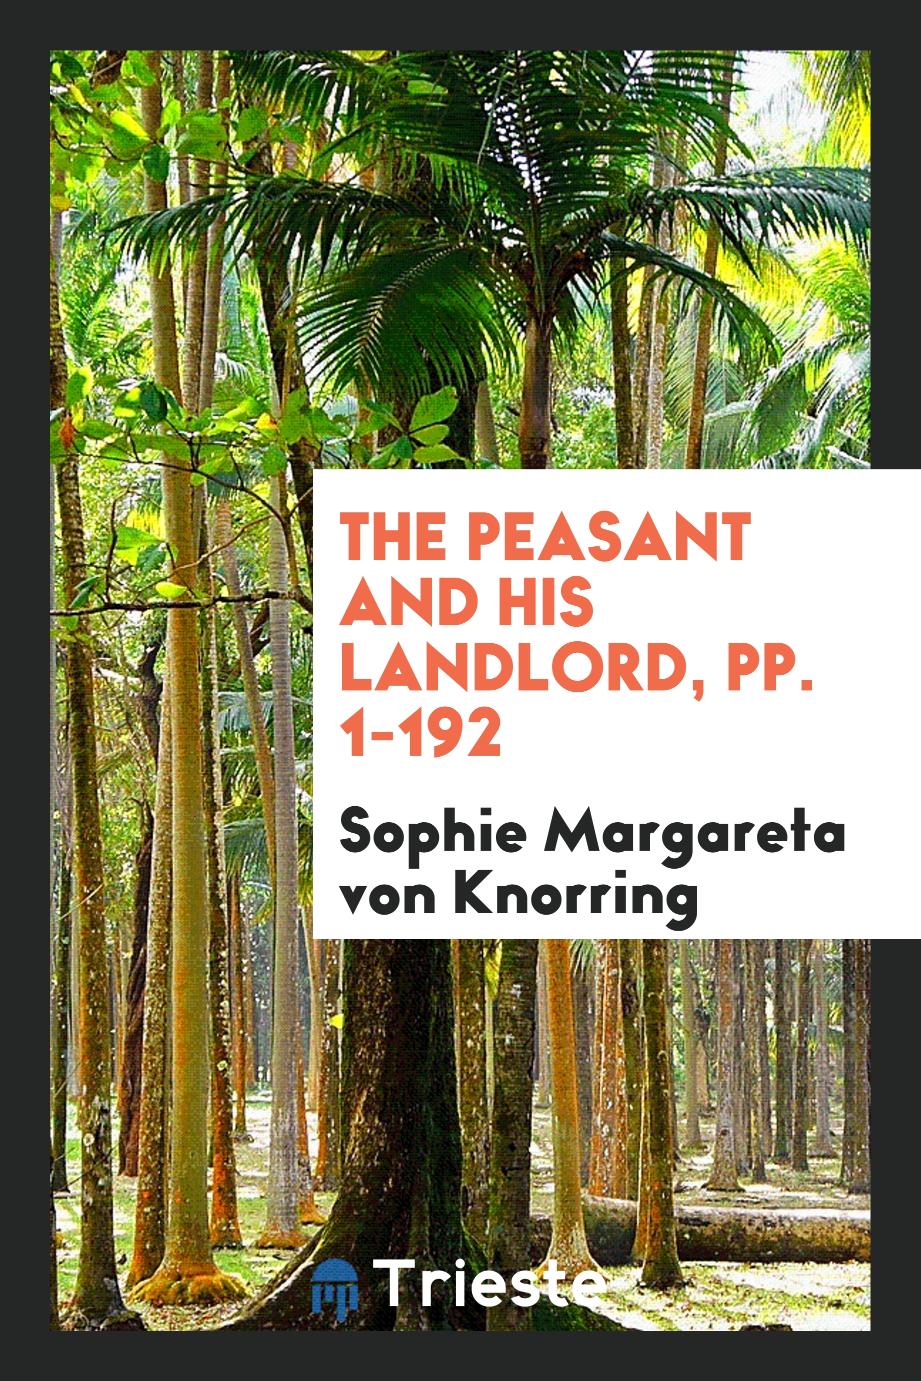 The Peasant and His Landlord, pp. 1-192